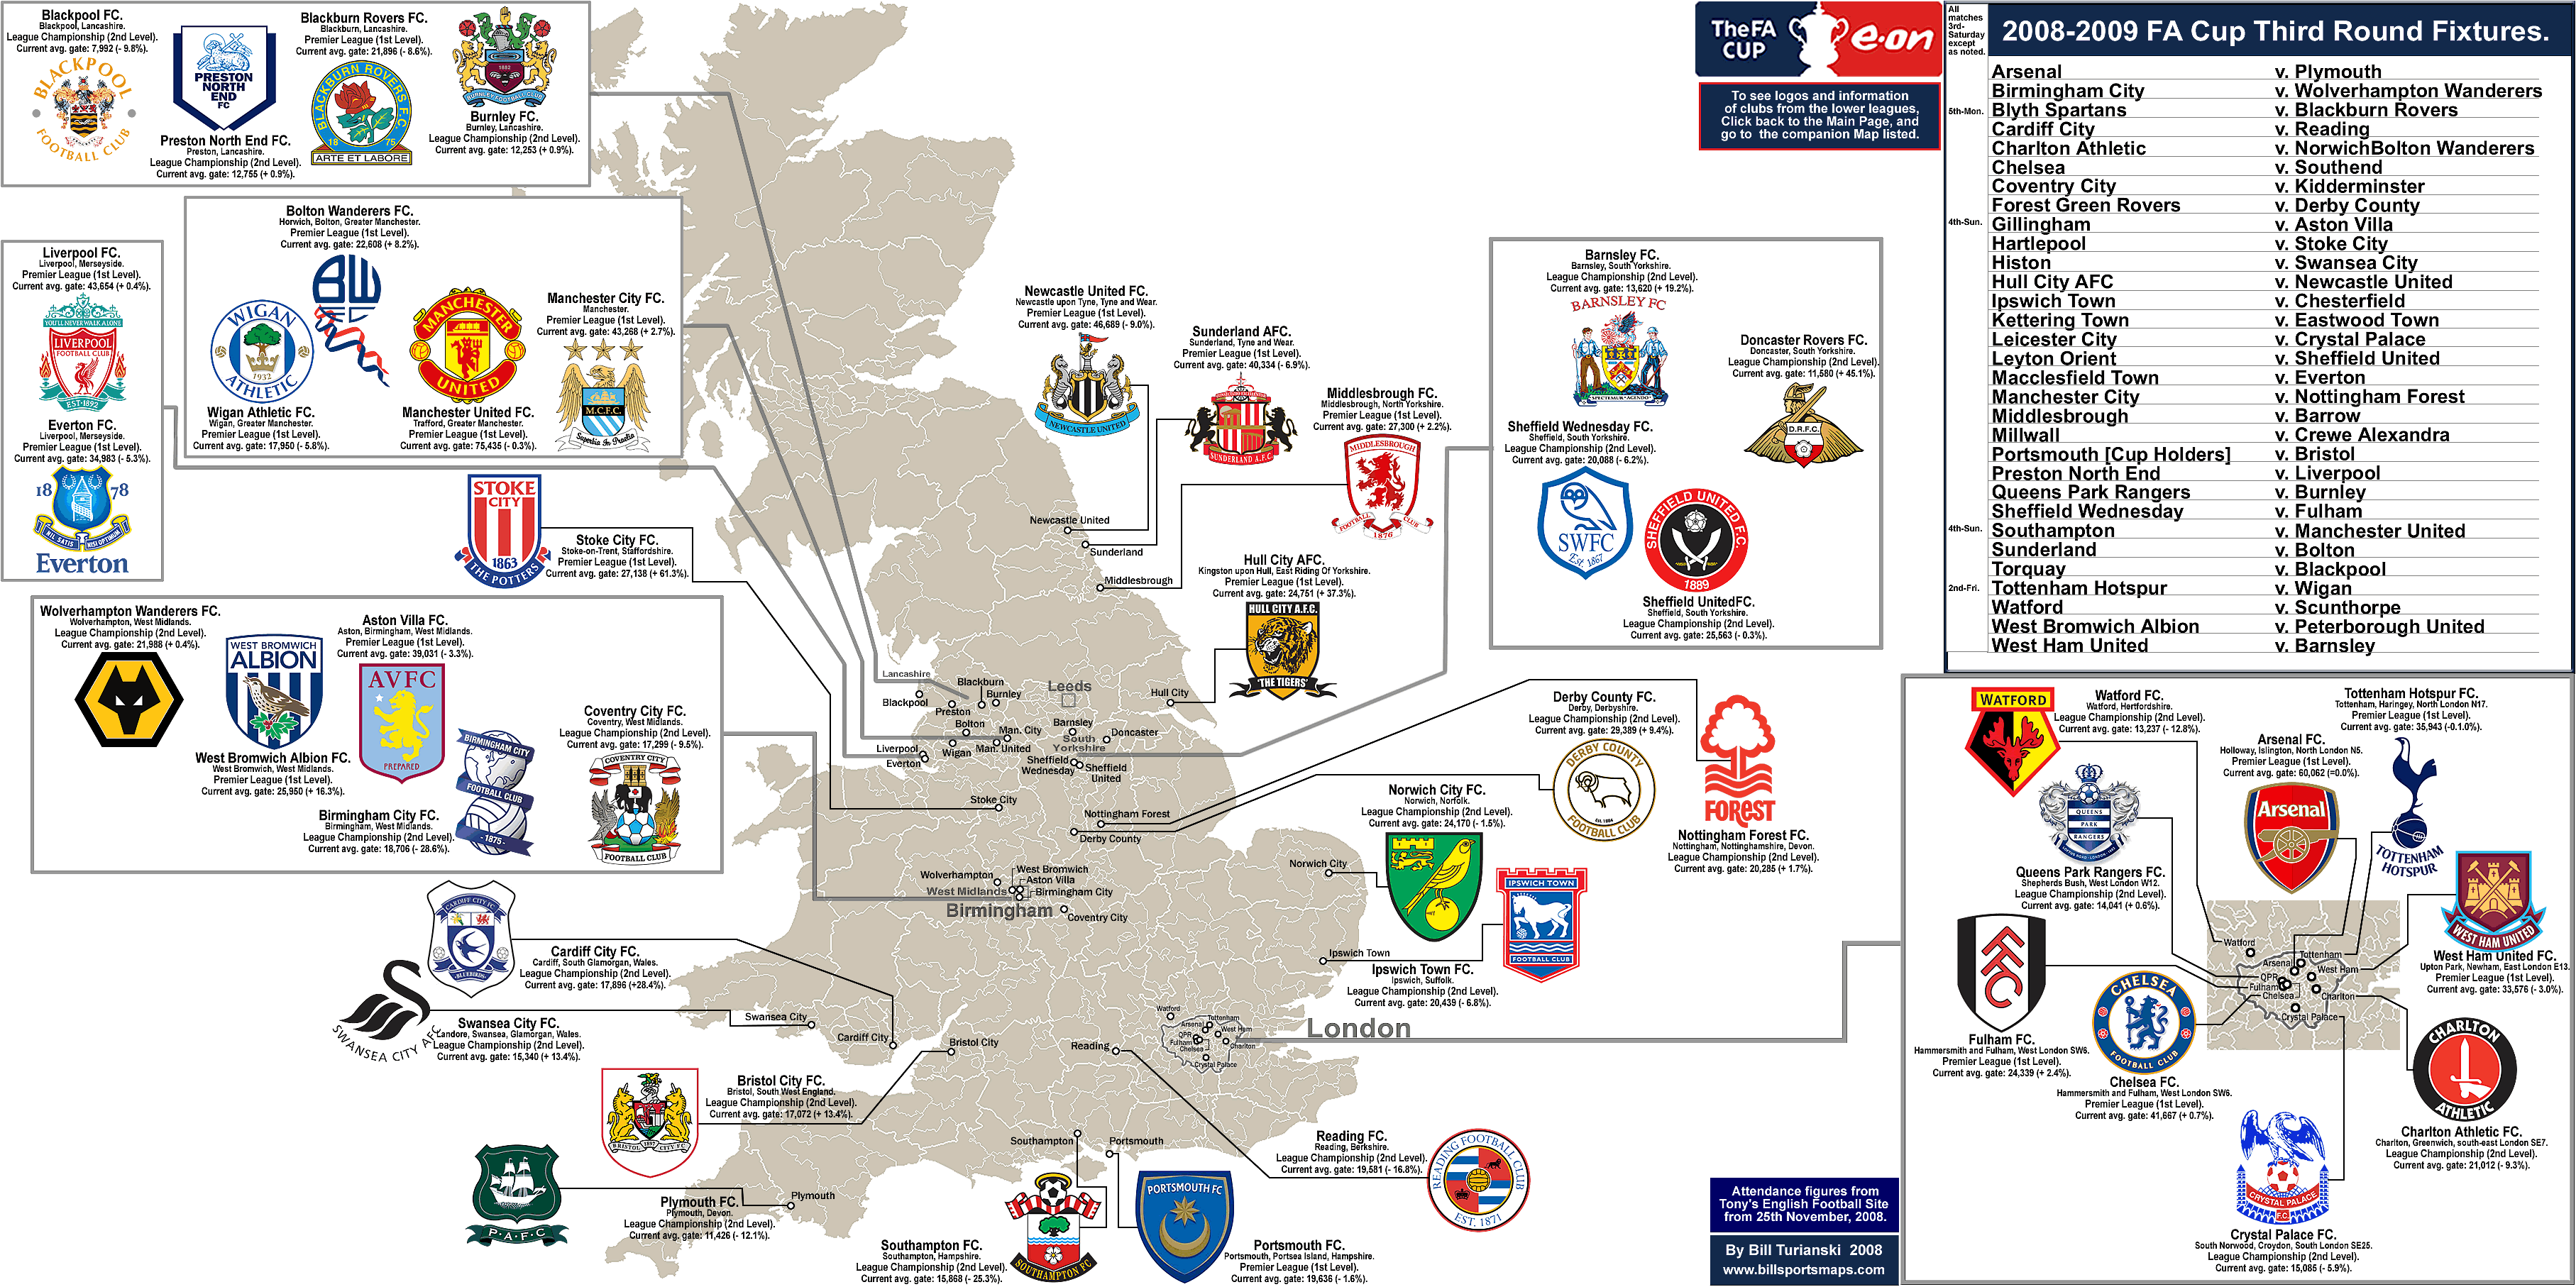 2008-09_fa-cup_3rd-round_44clubs-from-premier-league_and-league-championship_c.gif